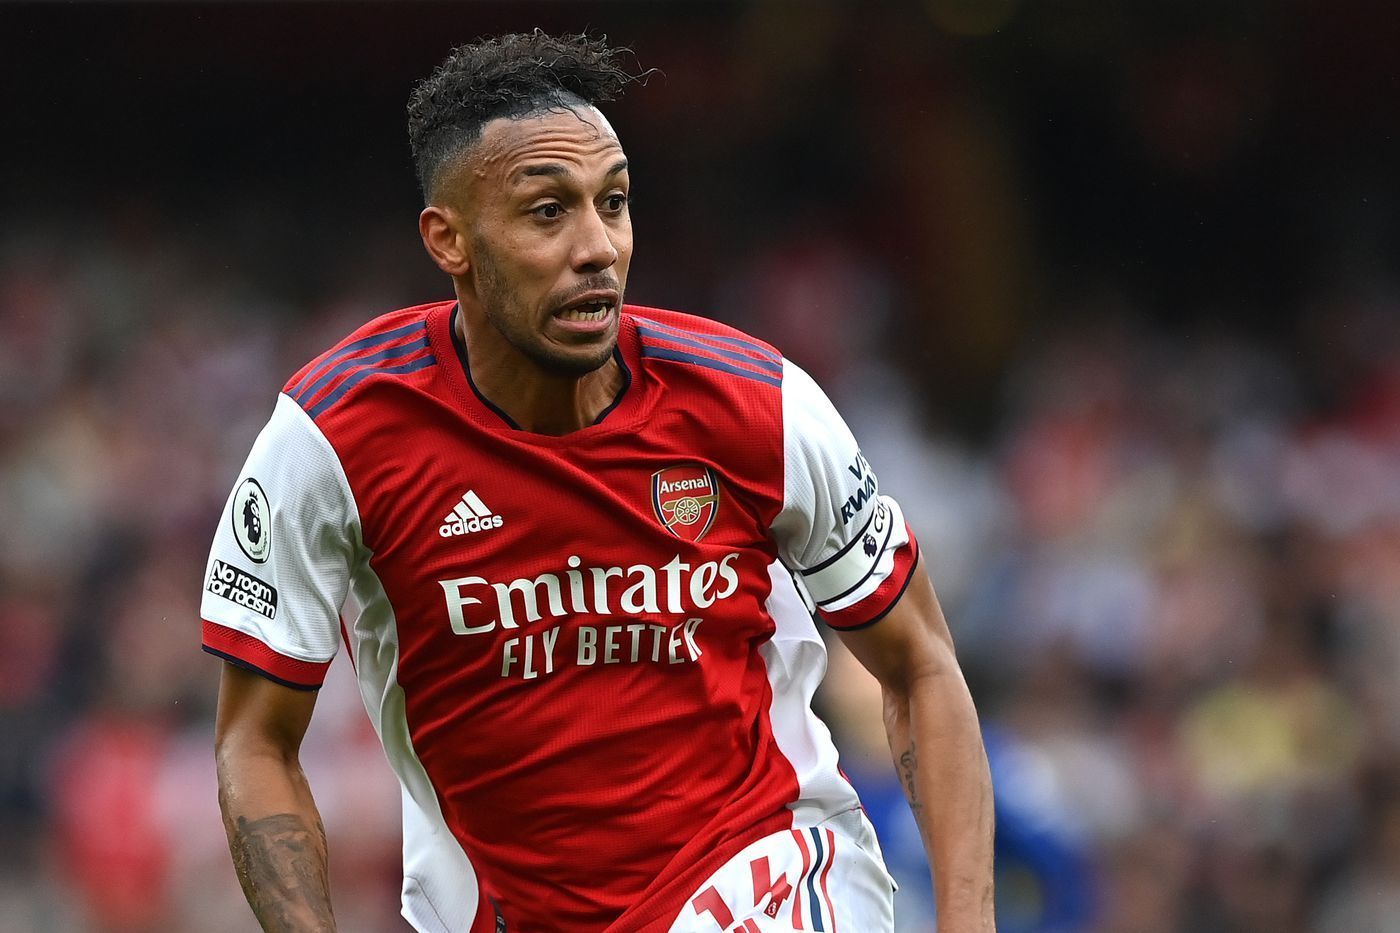 Can Aubameyang add to his four-goal tally?